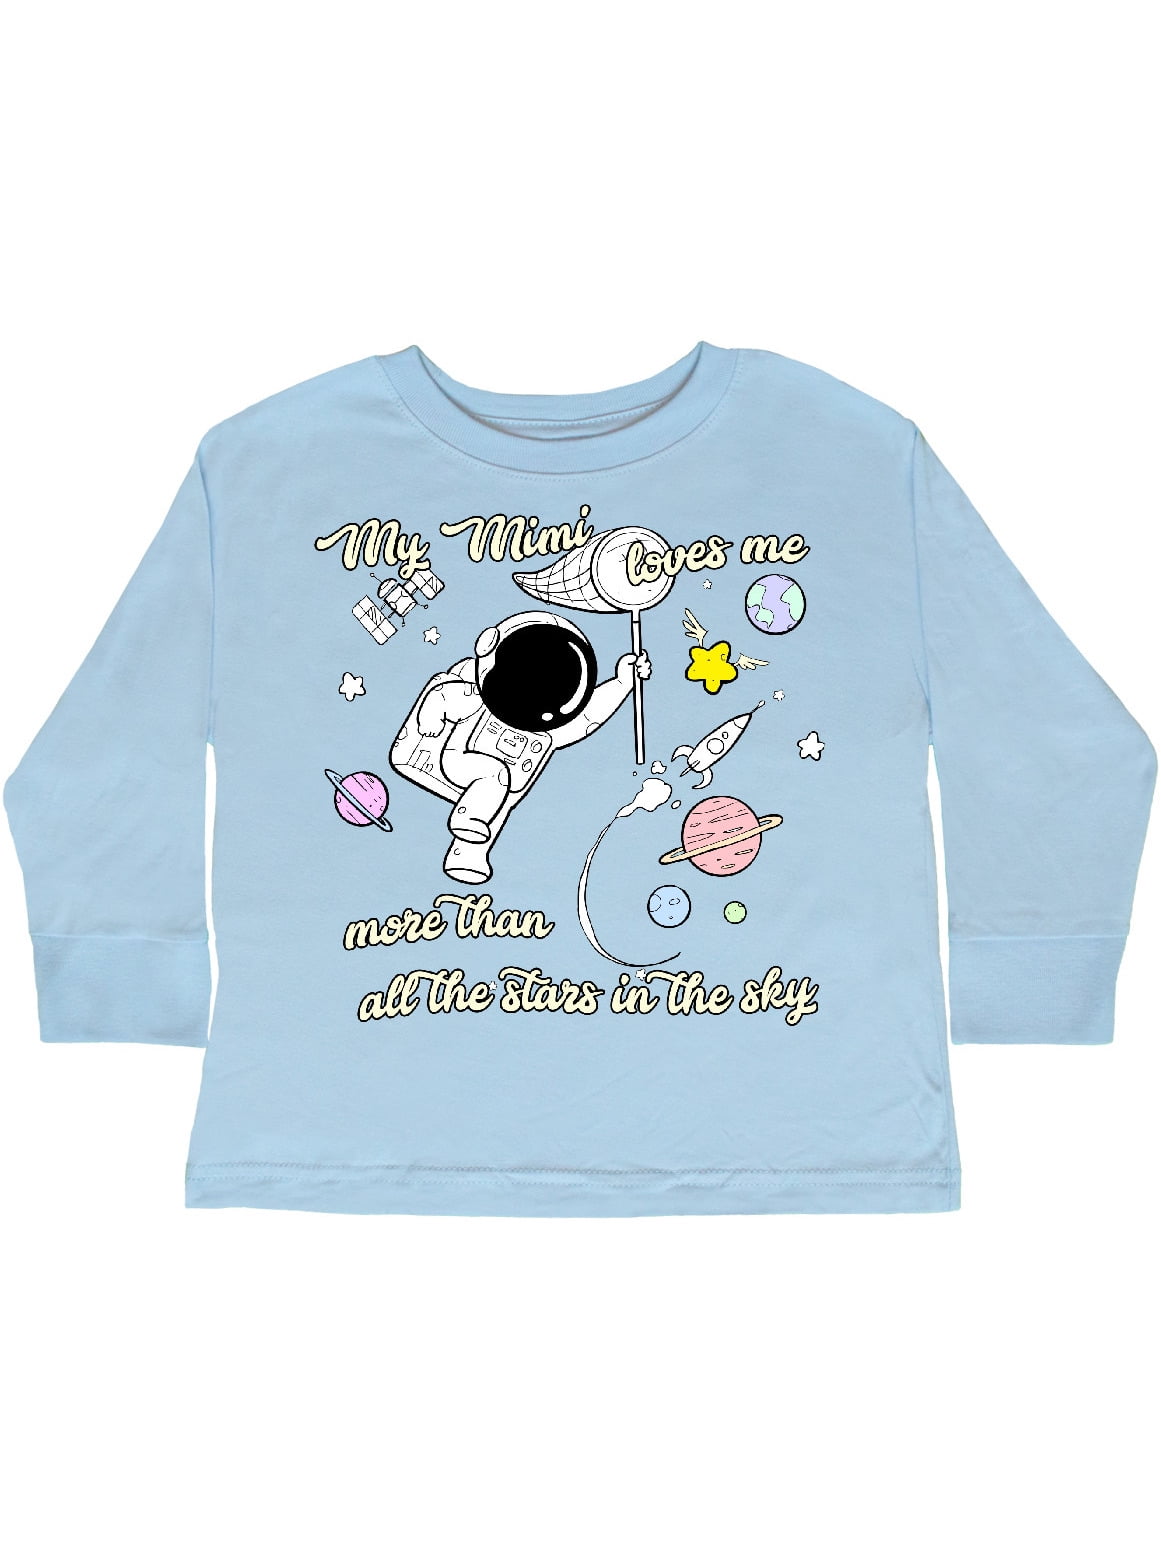 inktastic Grans Snuggle Bunny Easter Toddler T-Shirt